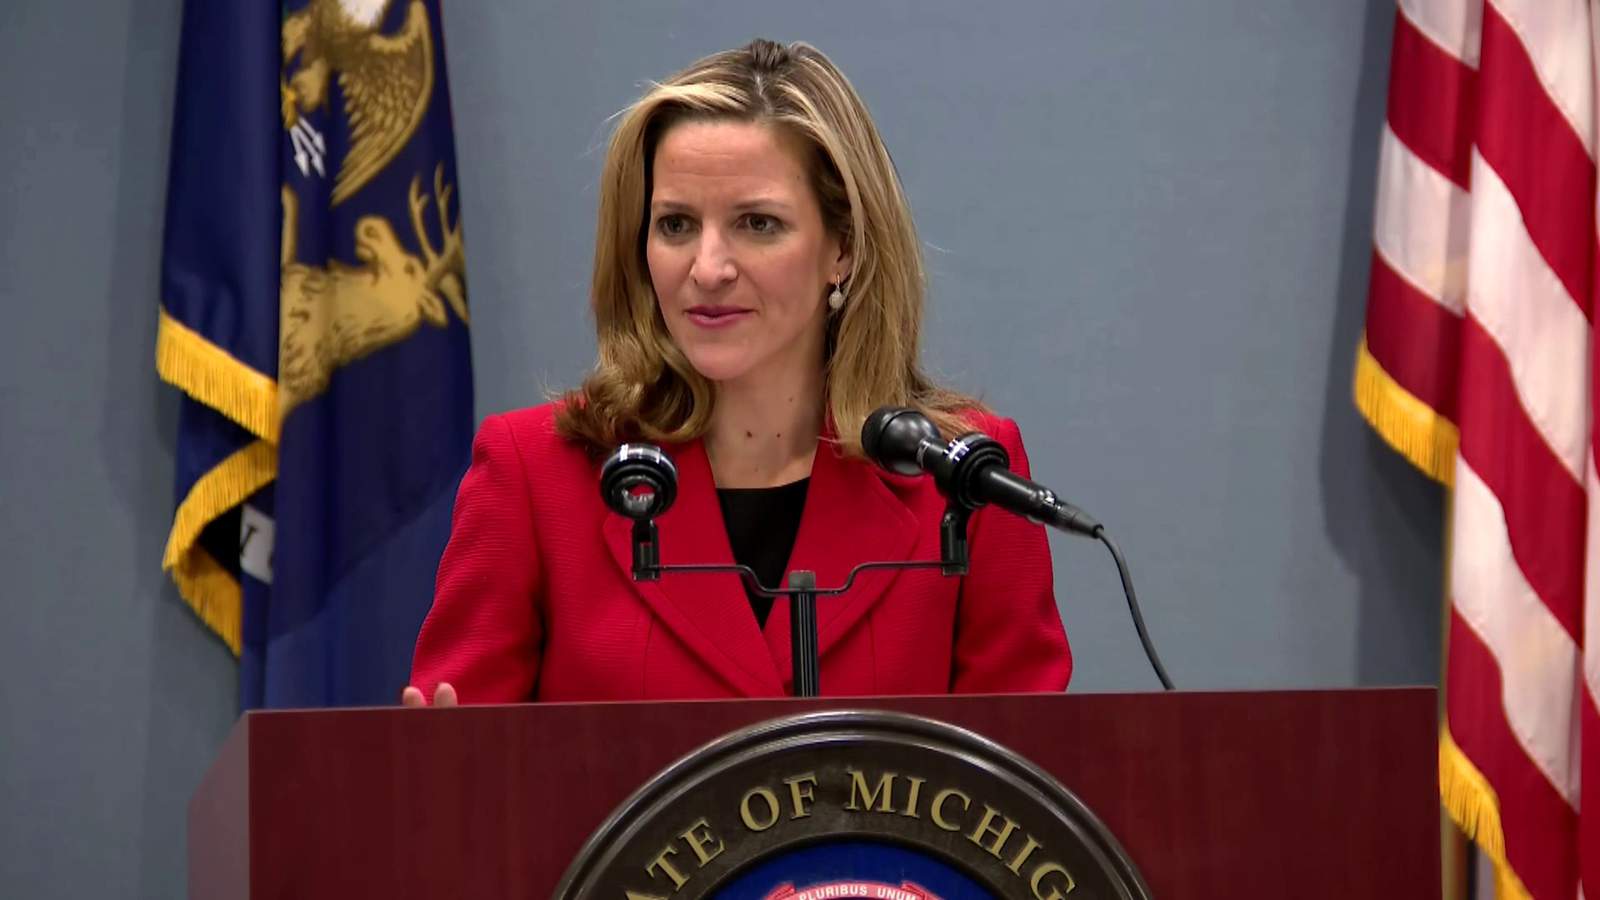 Watch: Michigan Secretary of State discusses customer service challenges